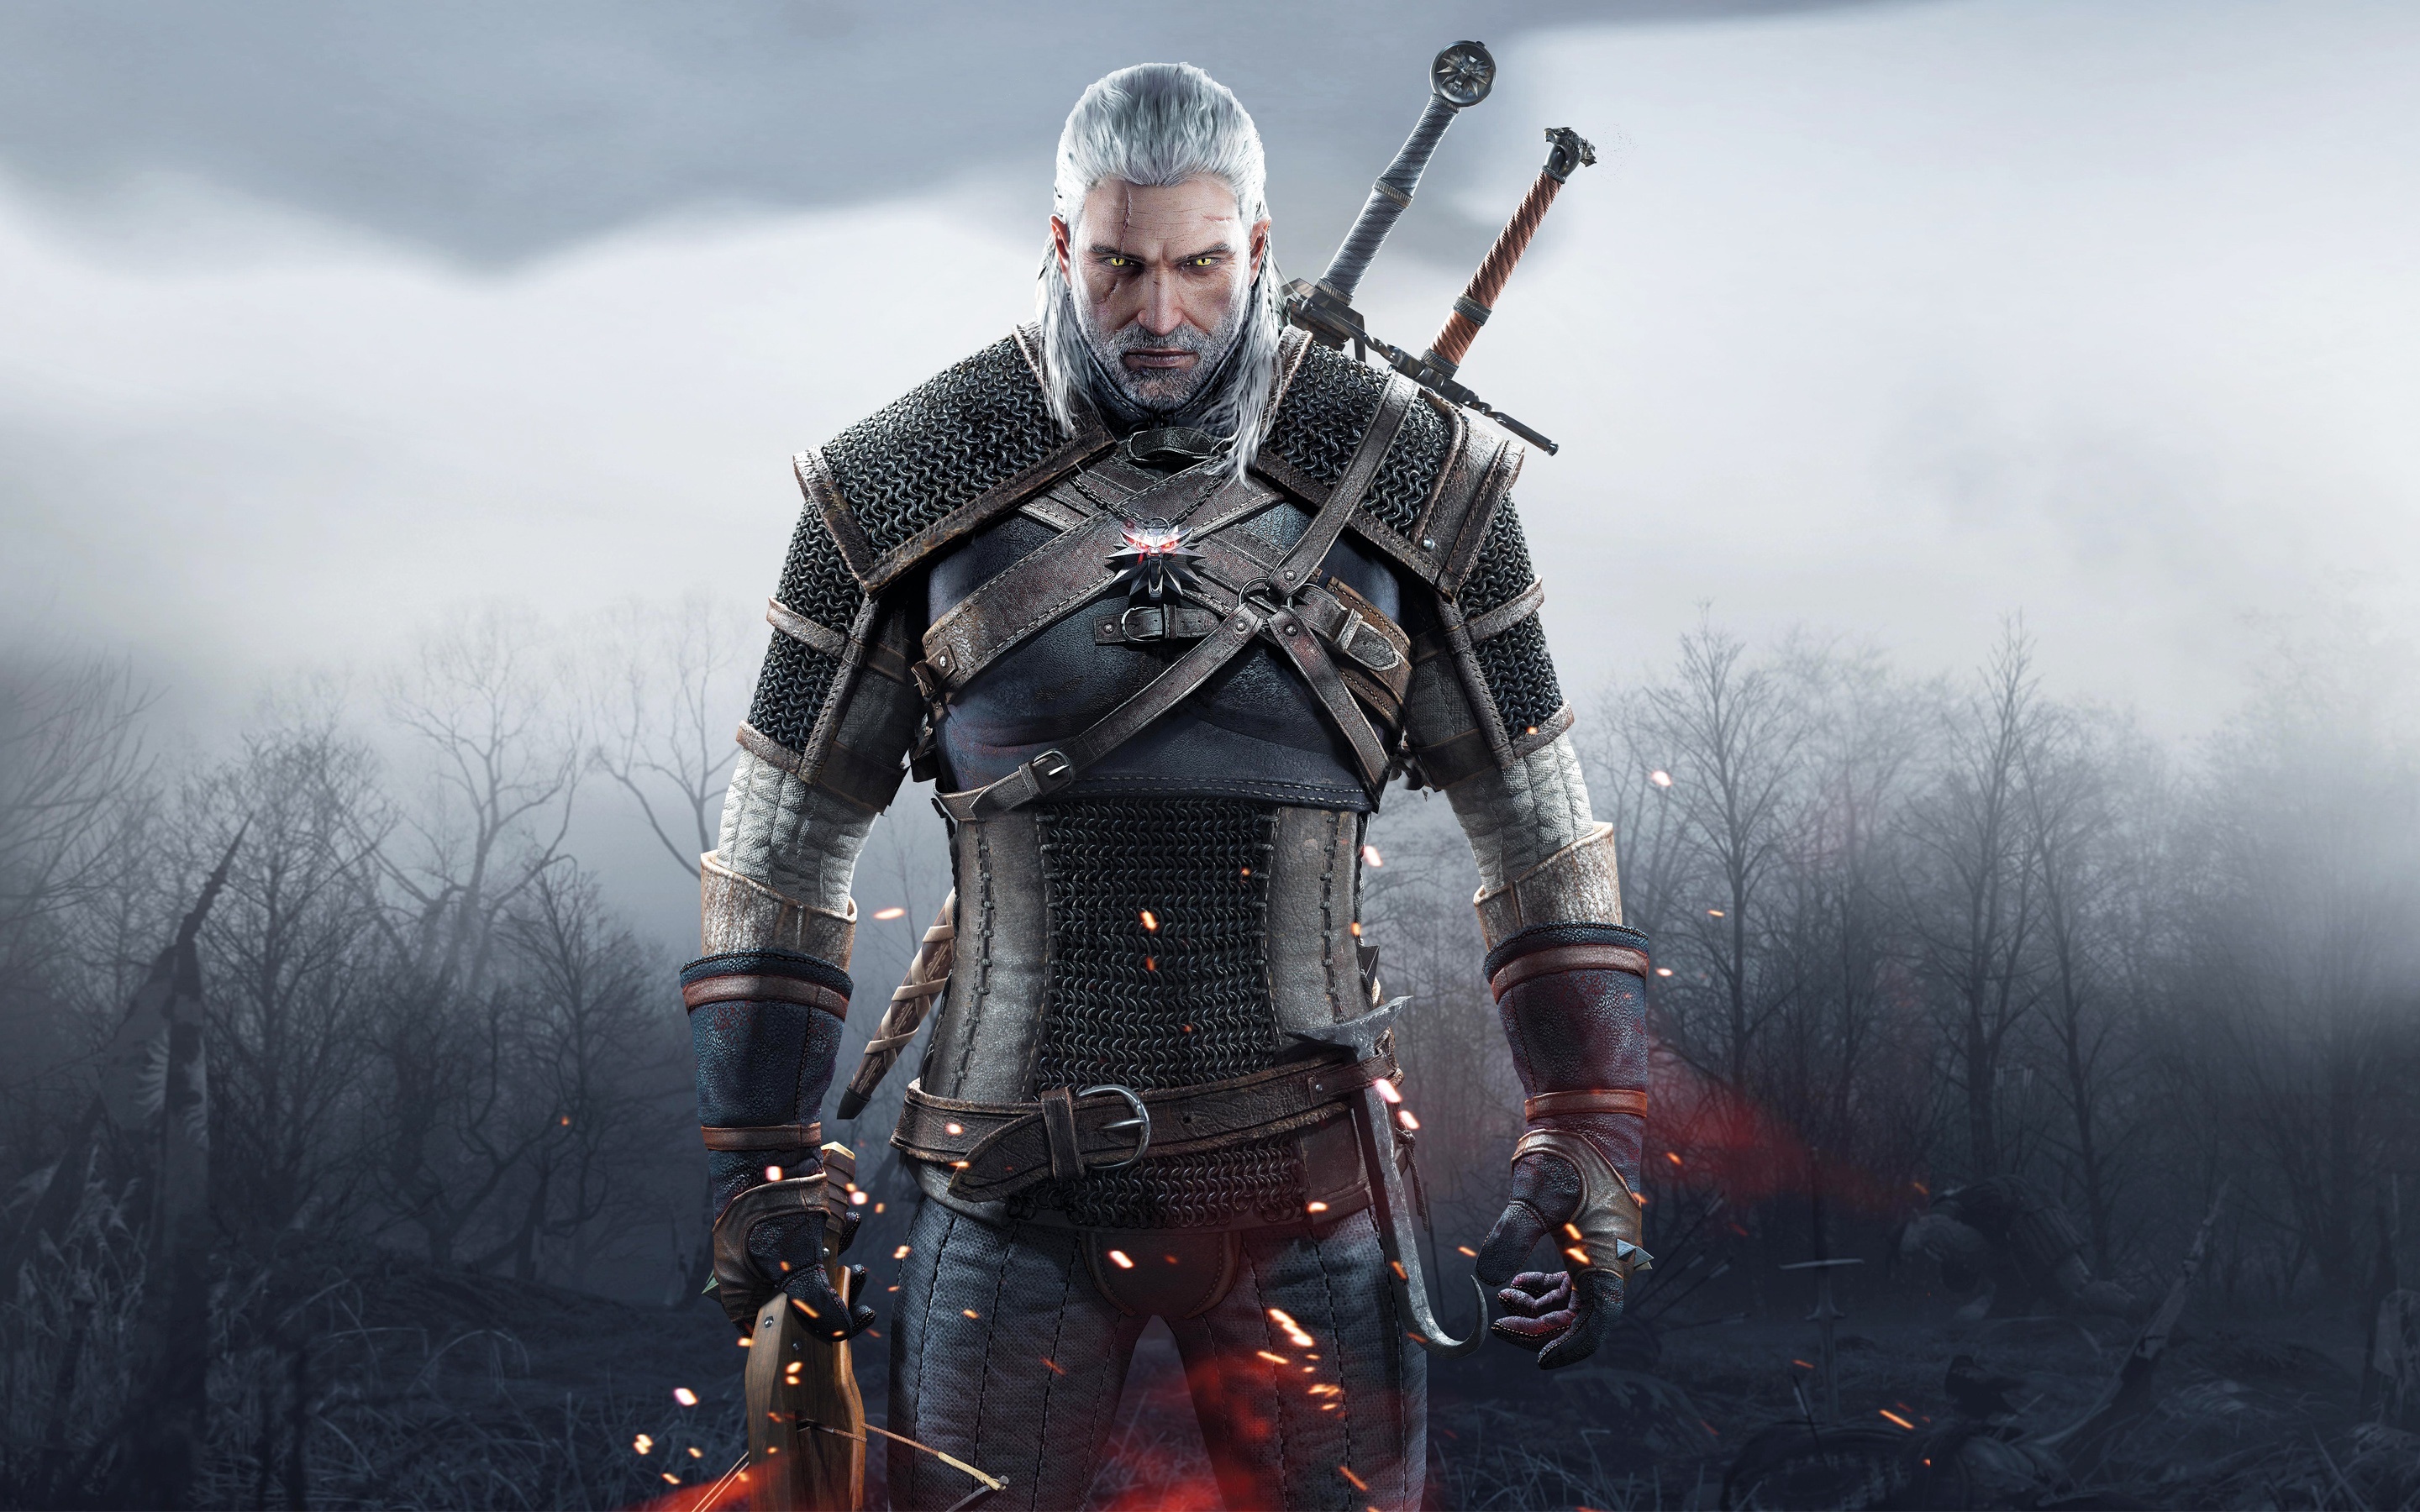 Check The Best Collection Of Witcher Wild Hunt Wallpaper Below